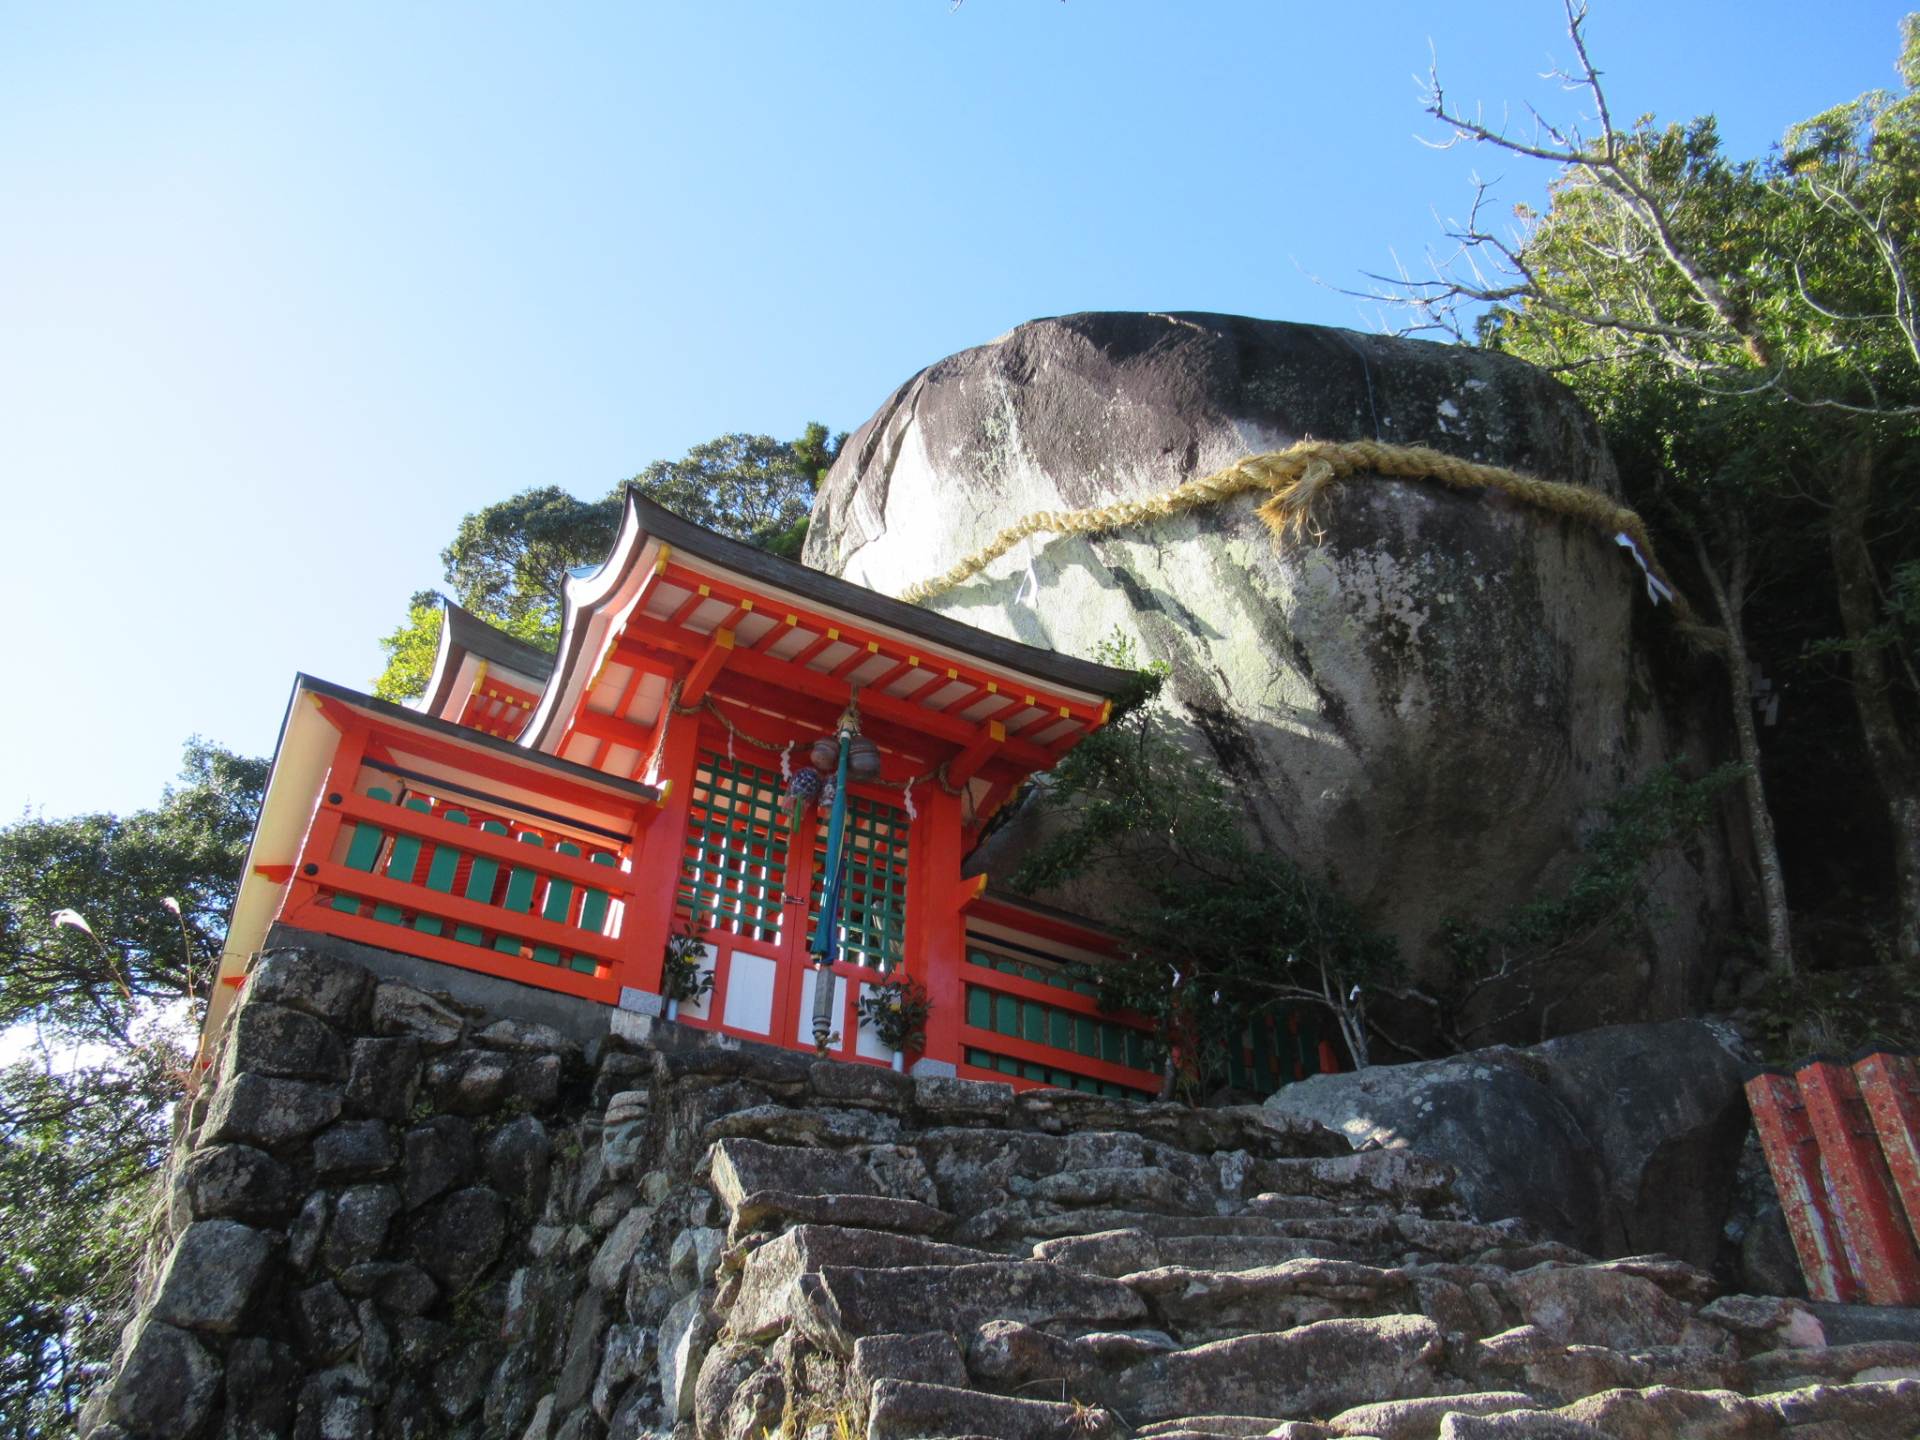 The great boulder is called Gotobiki Rock and is the spot where the deity Hayatama-no-okami is said to have descended to earth.